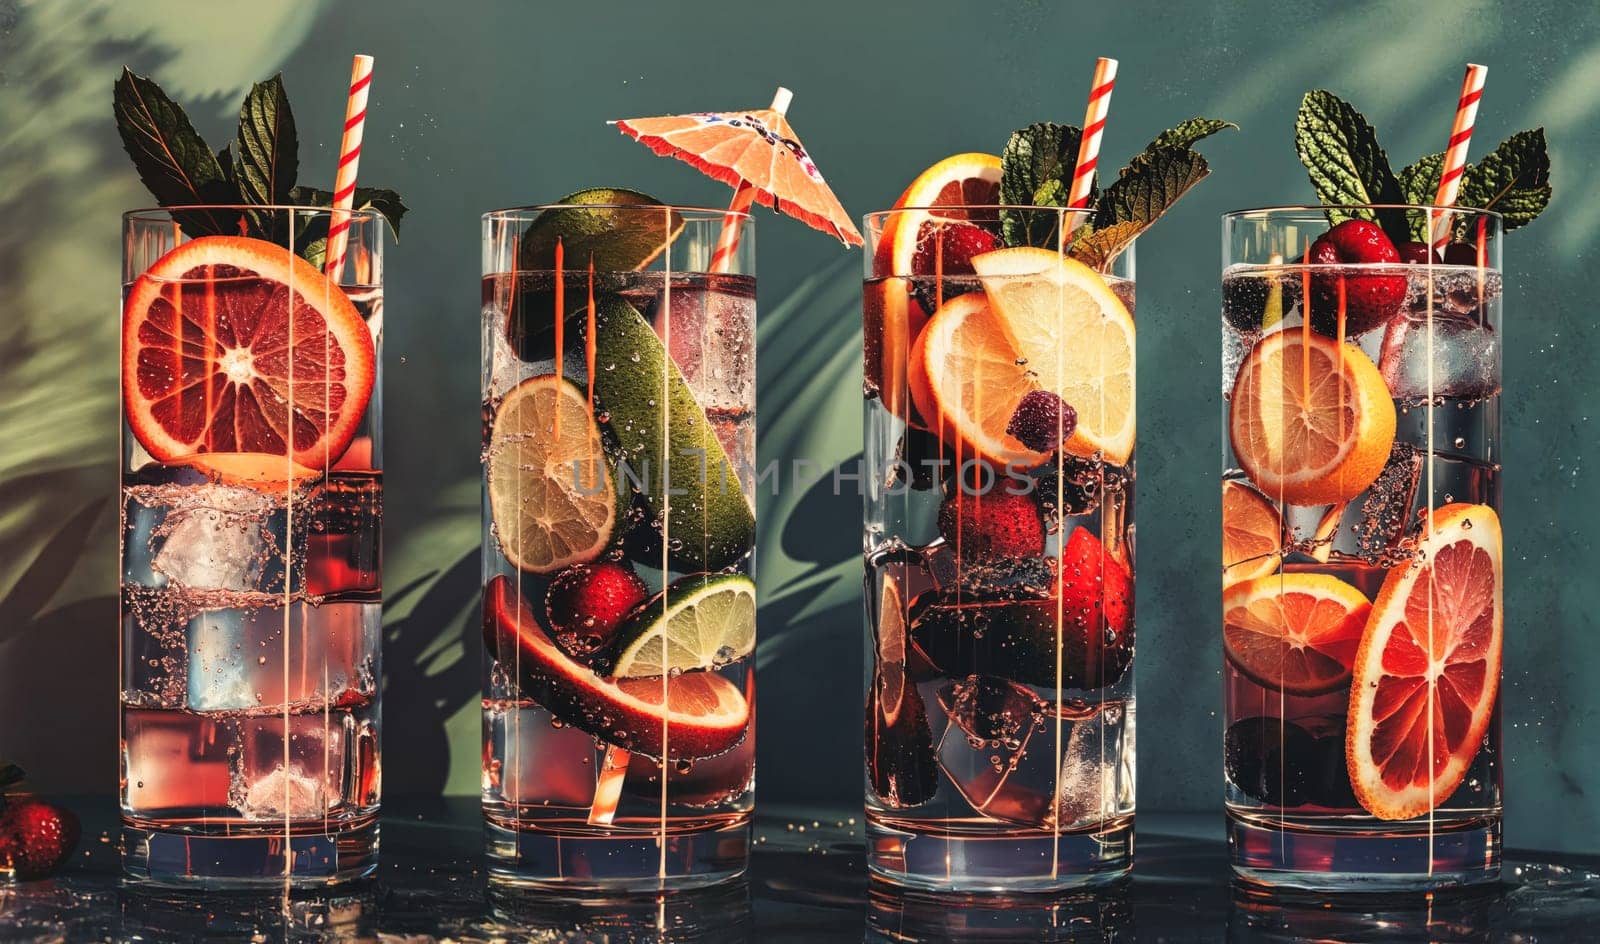 A close-up of four tall glasses filled with colorful fruit, ice, and sparkling water, ready to quench thirst on a hot day.